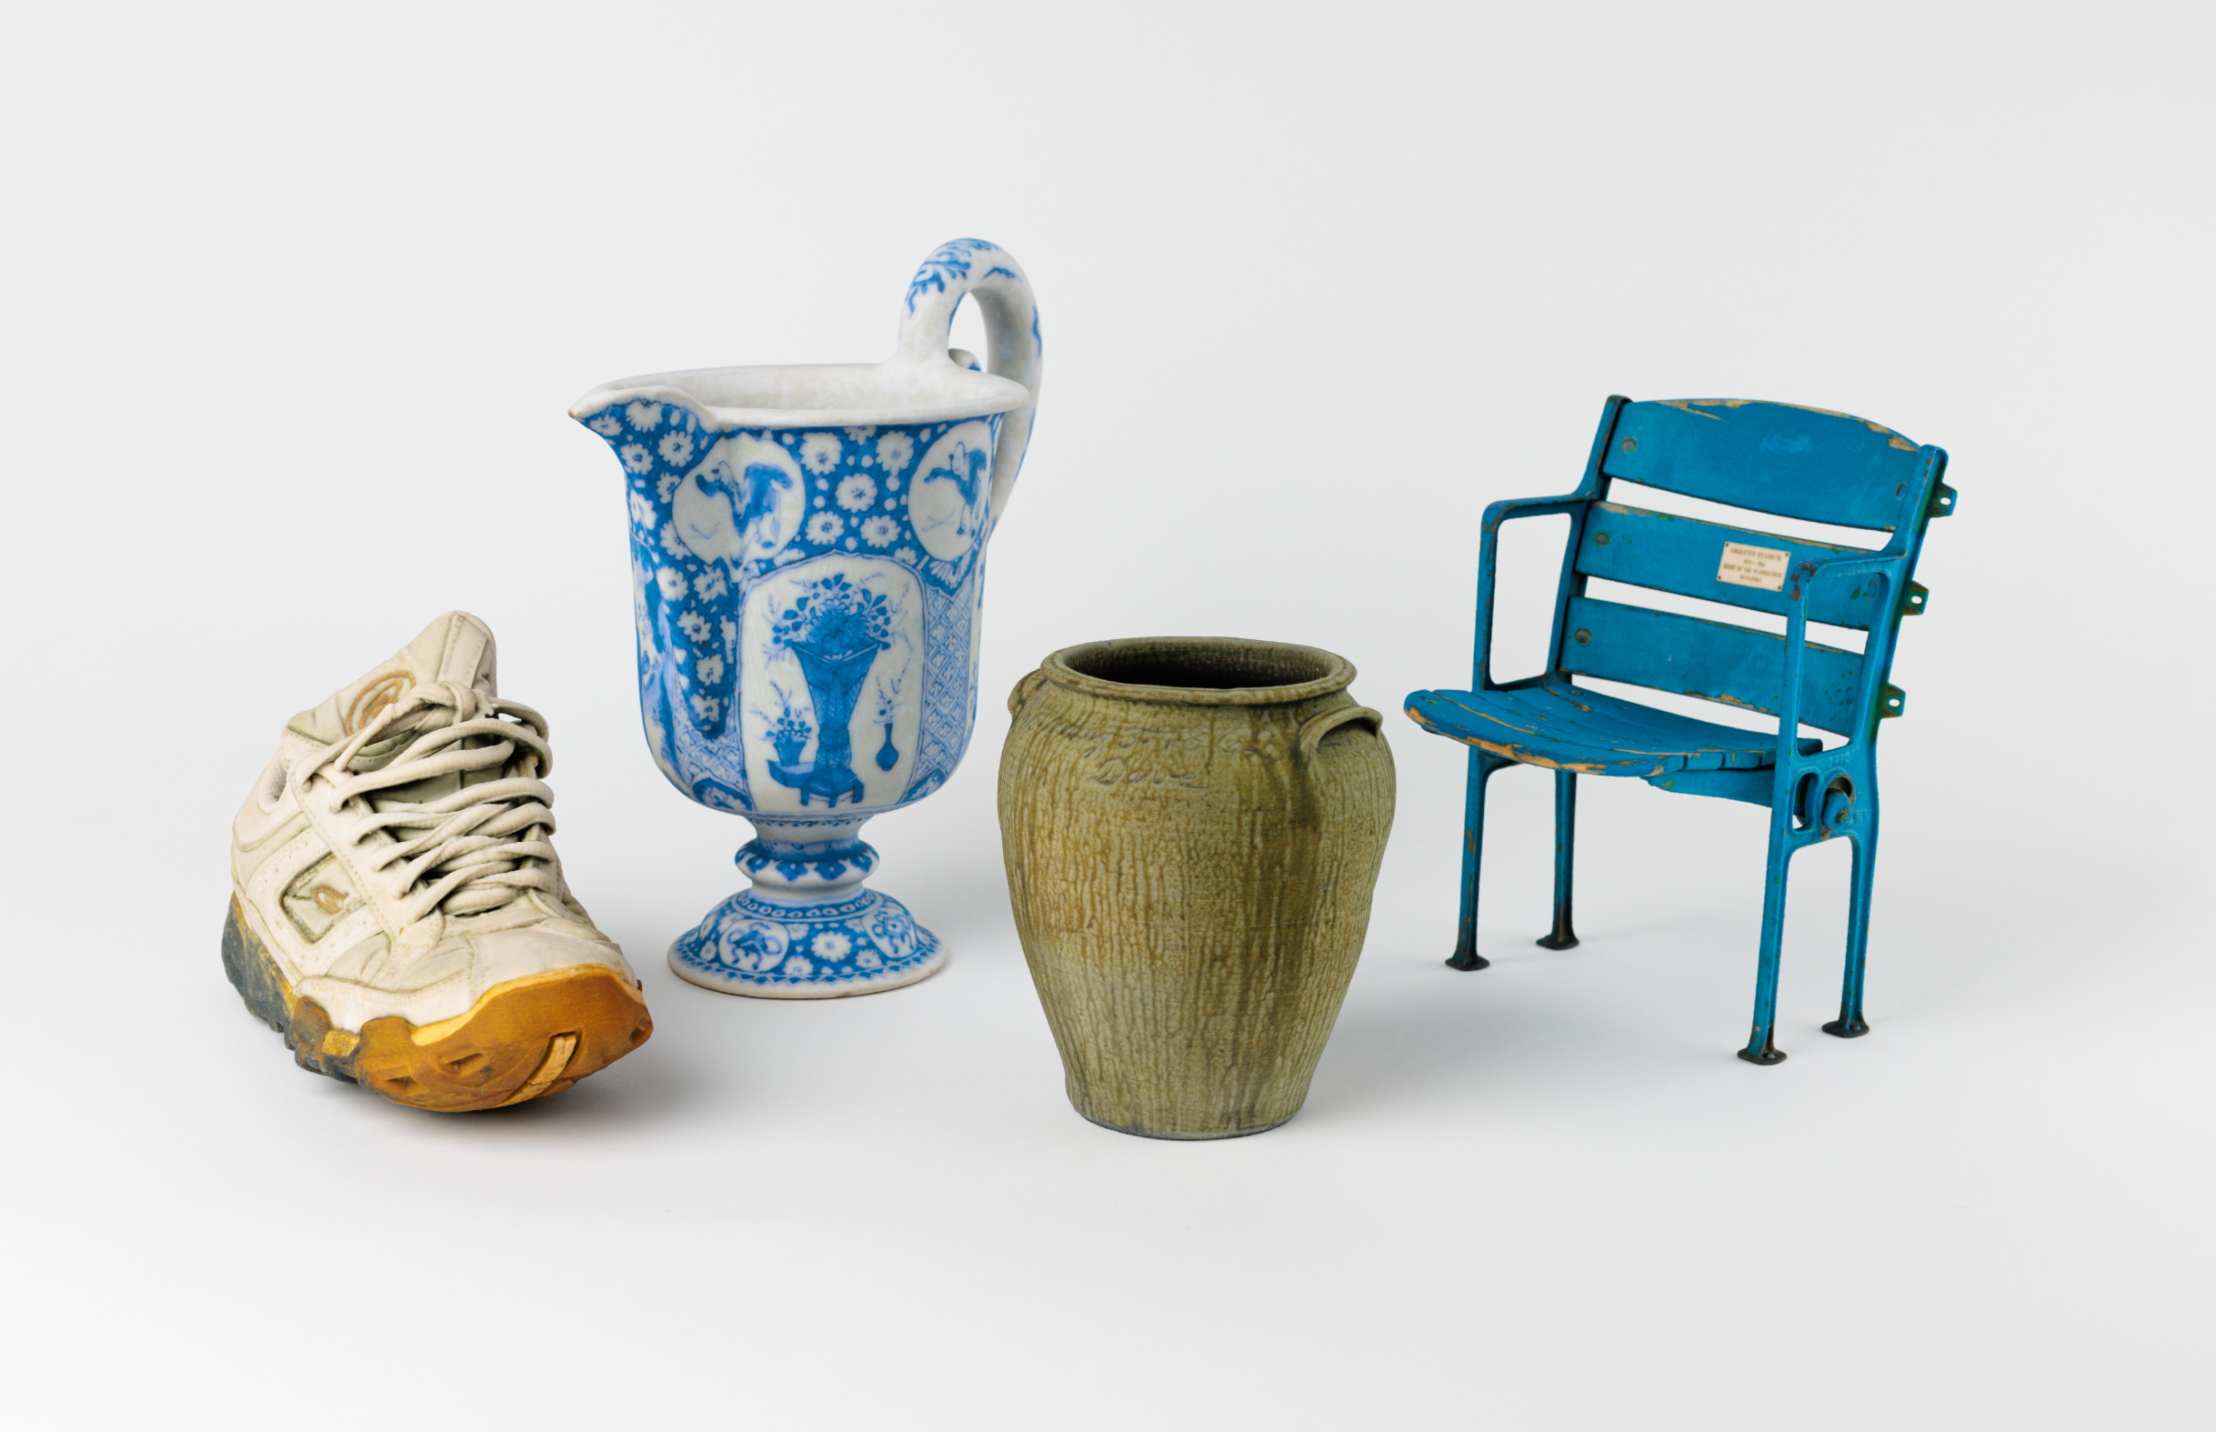 Four 3D printed objects - a shoe, pitcher, vase, and small stadium seat.